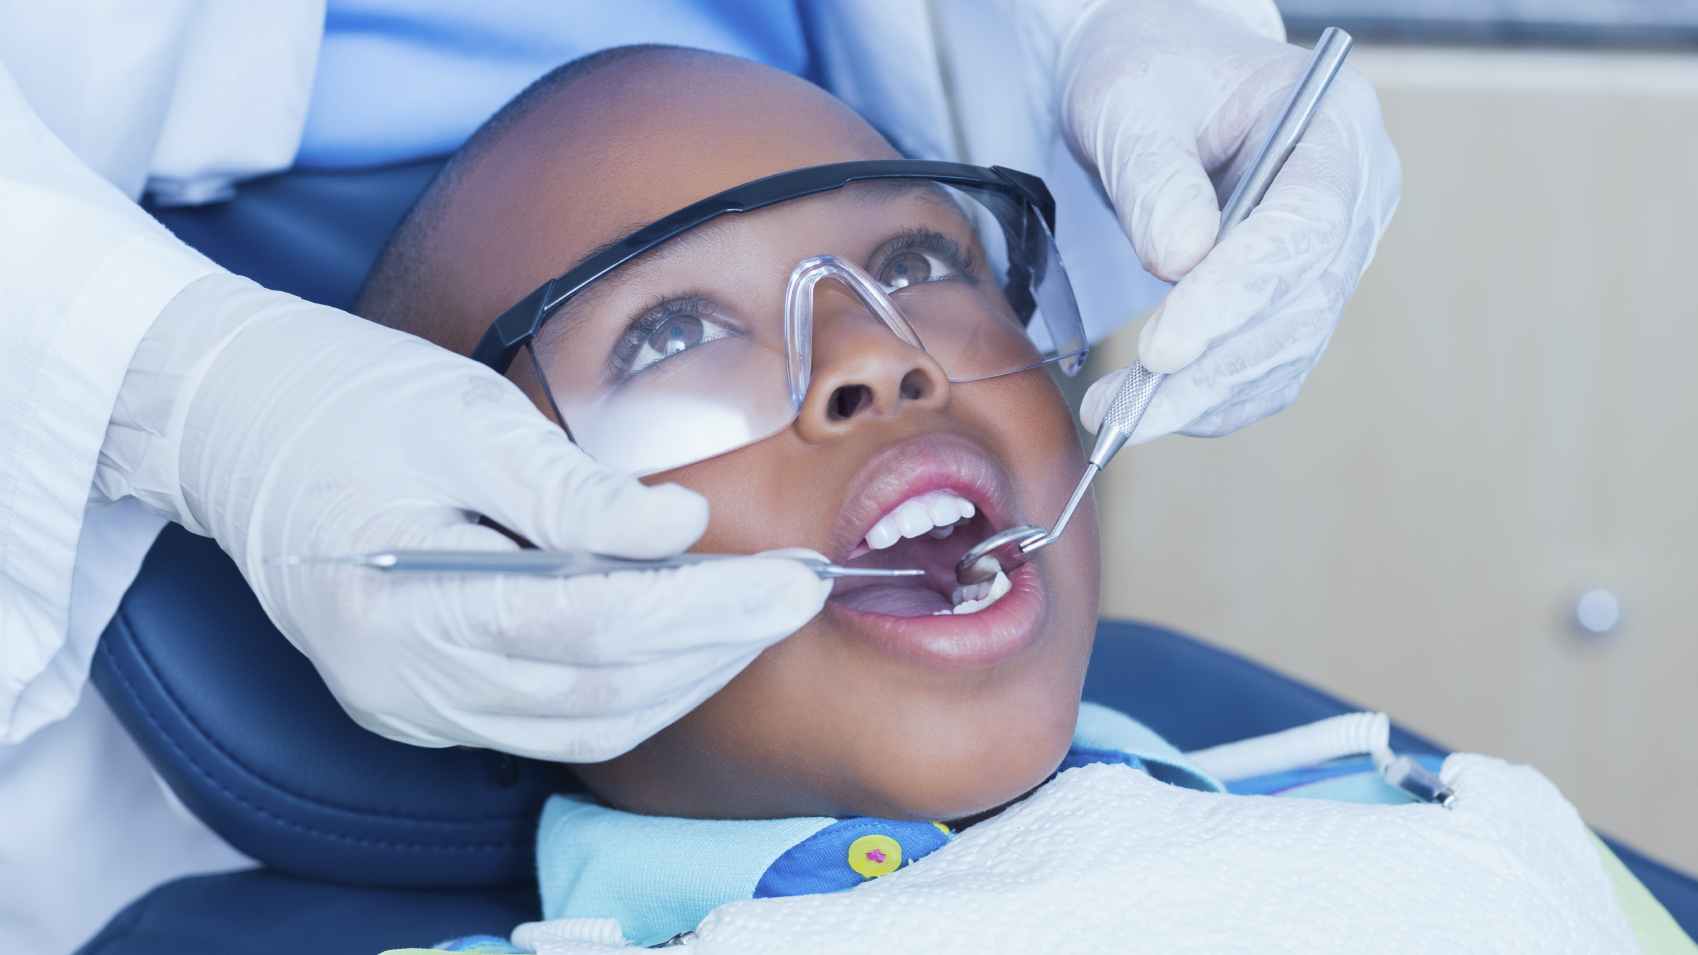 A child's mouth being examined by health care professional.